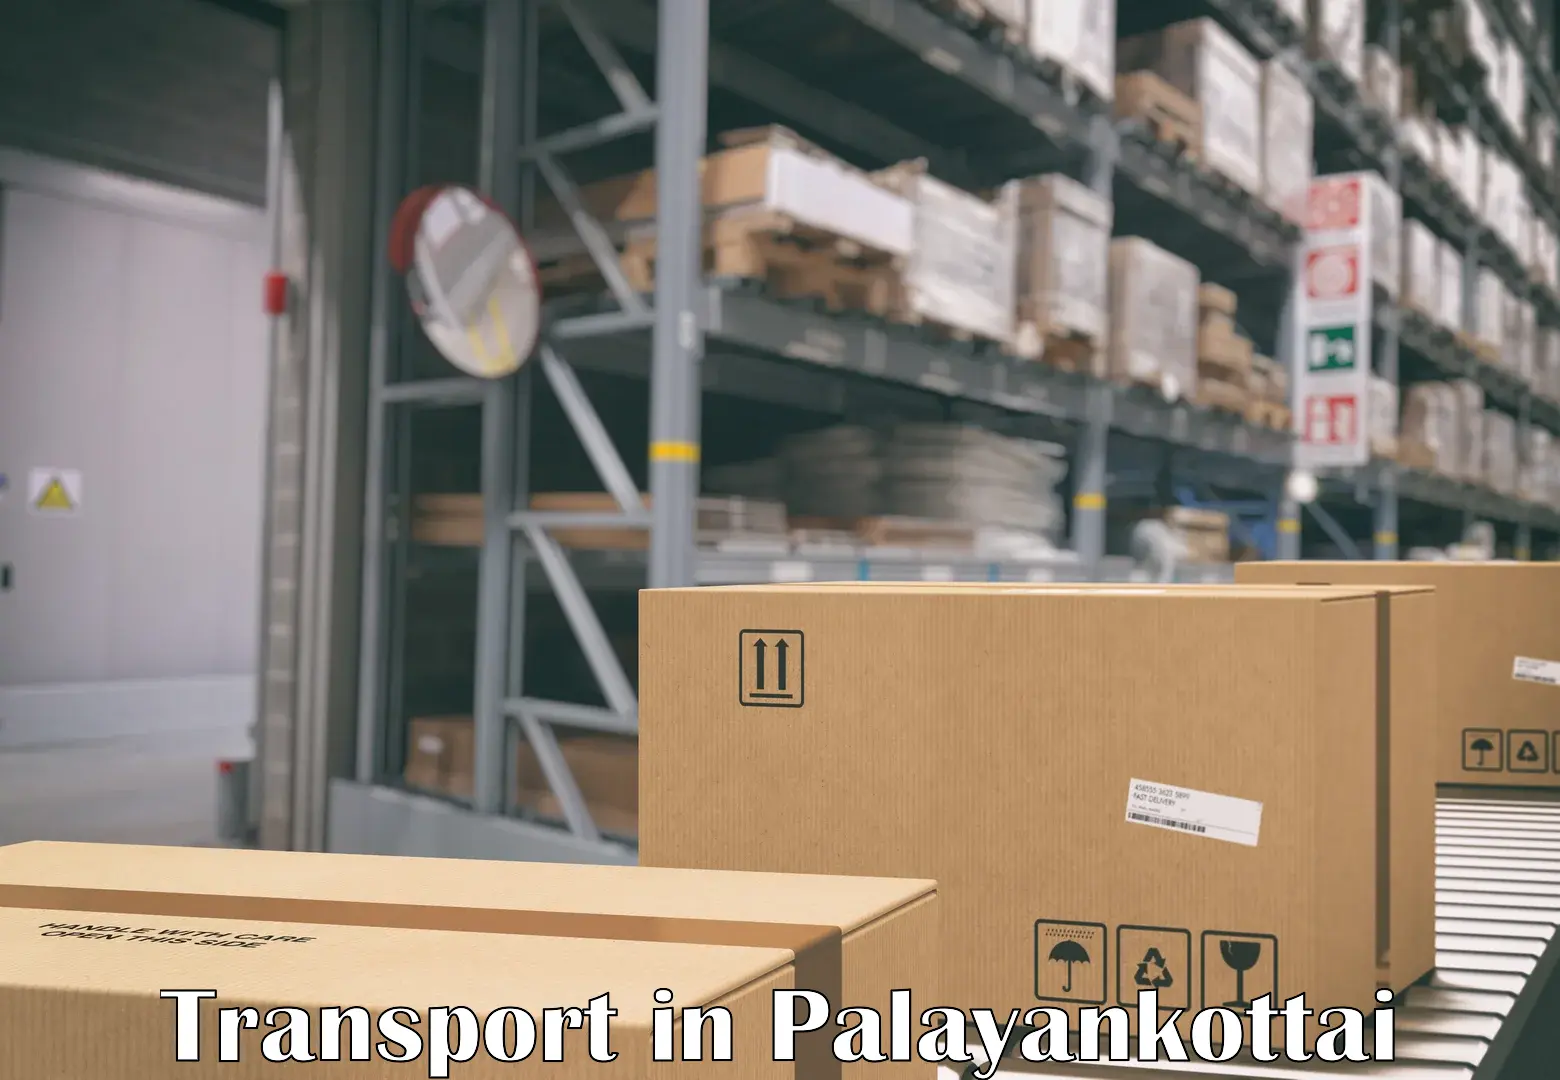 Container transportation services in Palayankottai